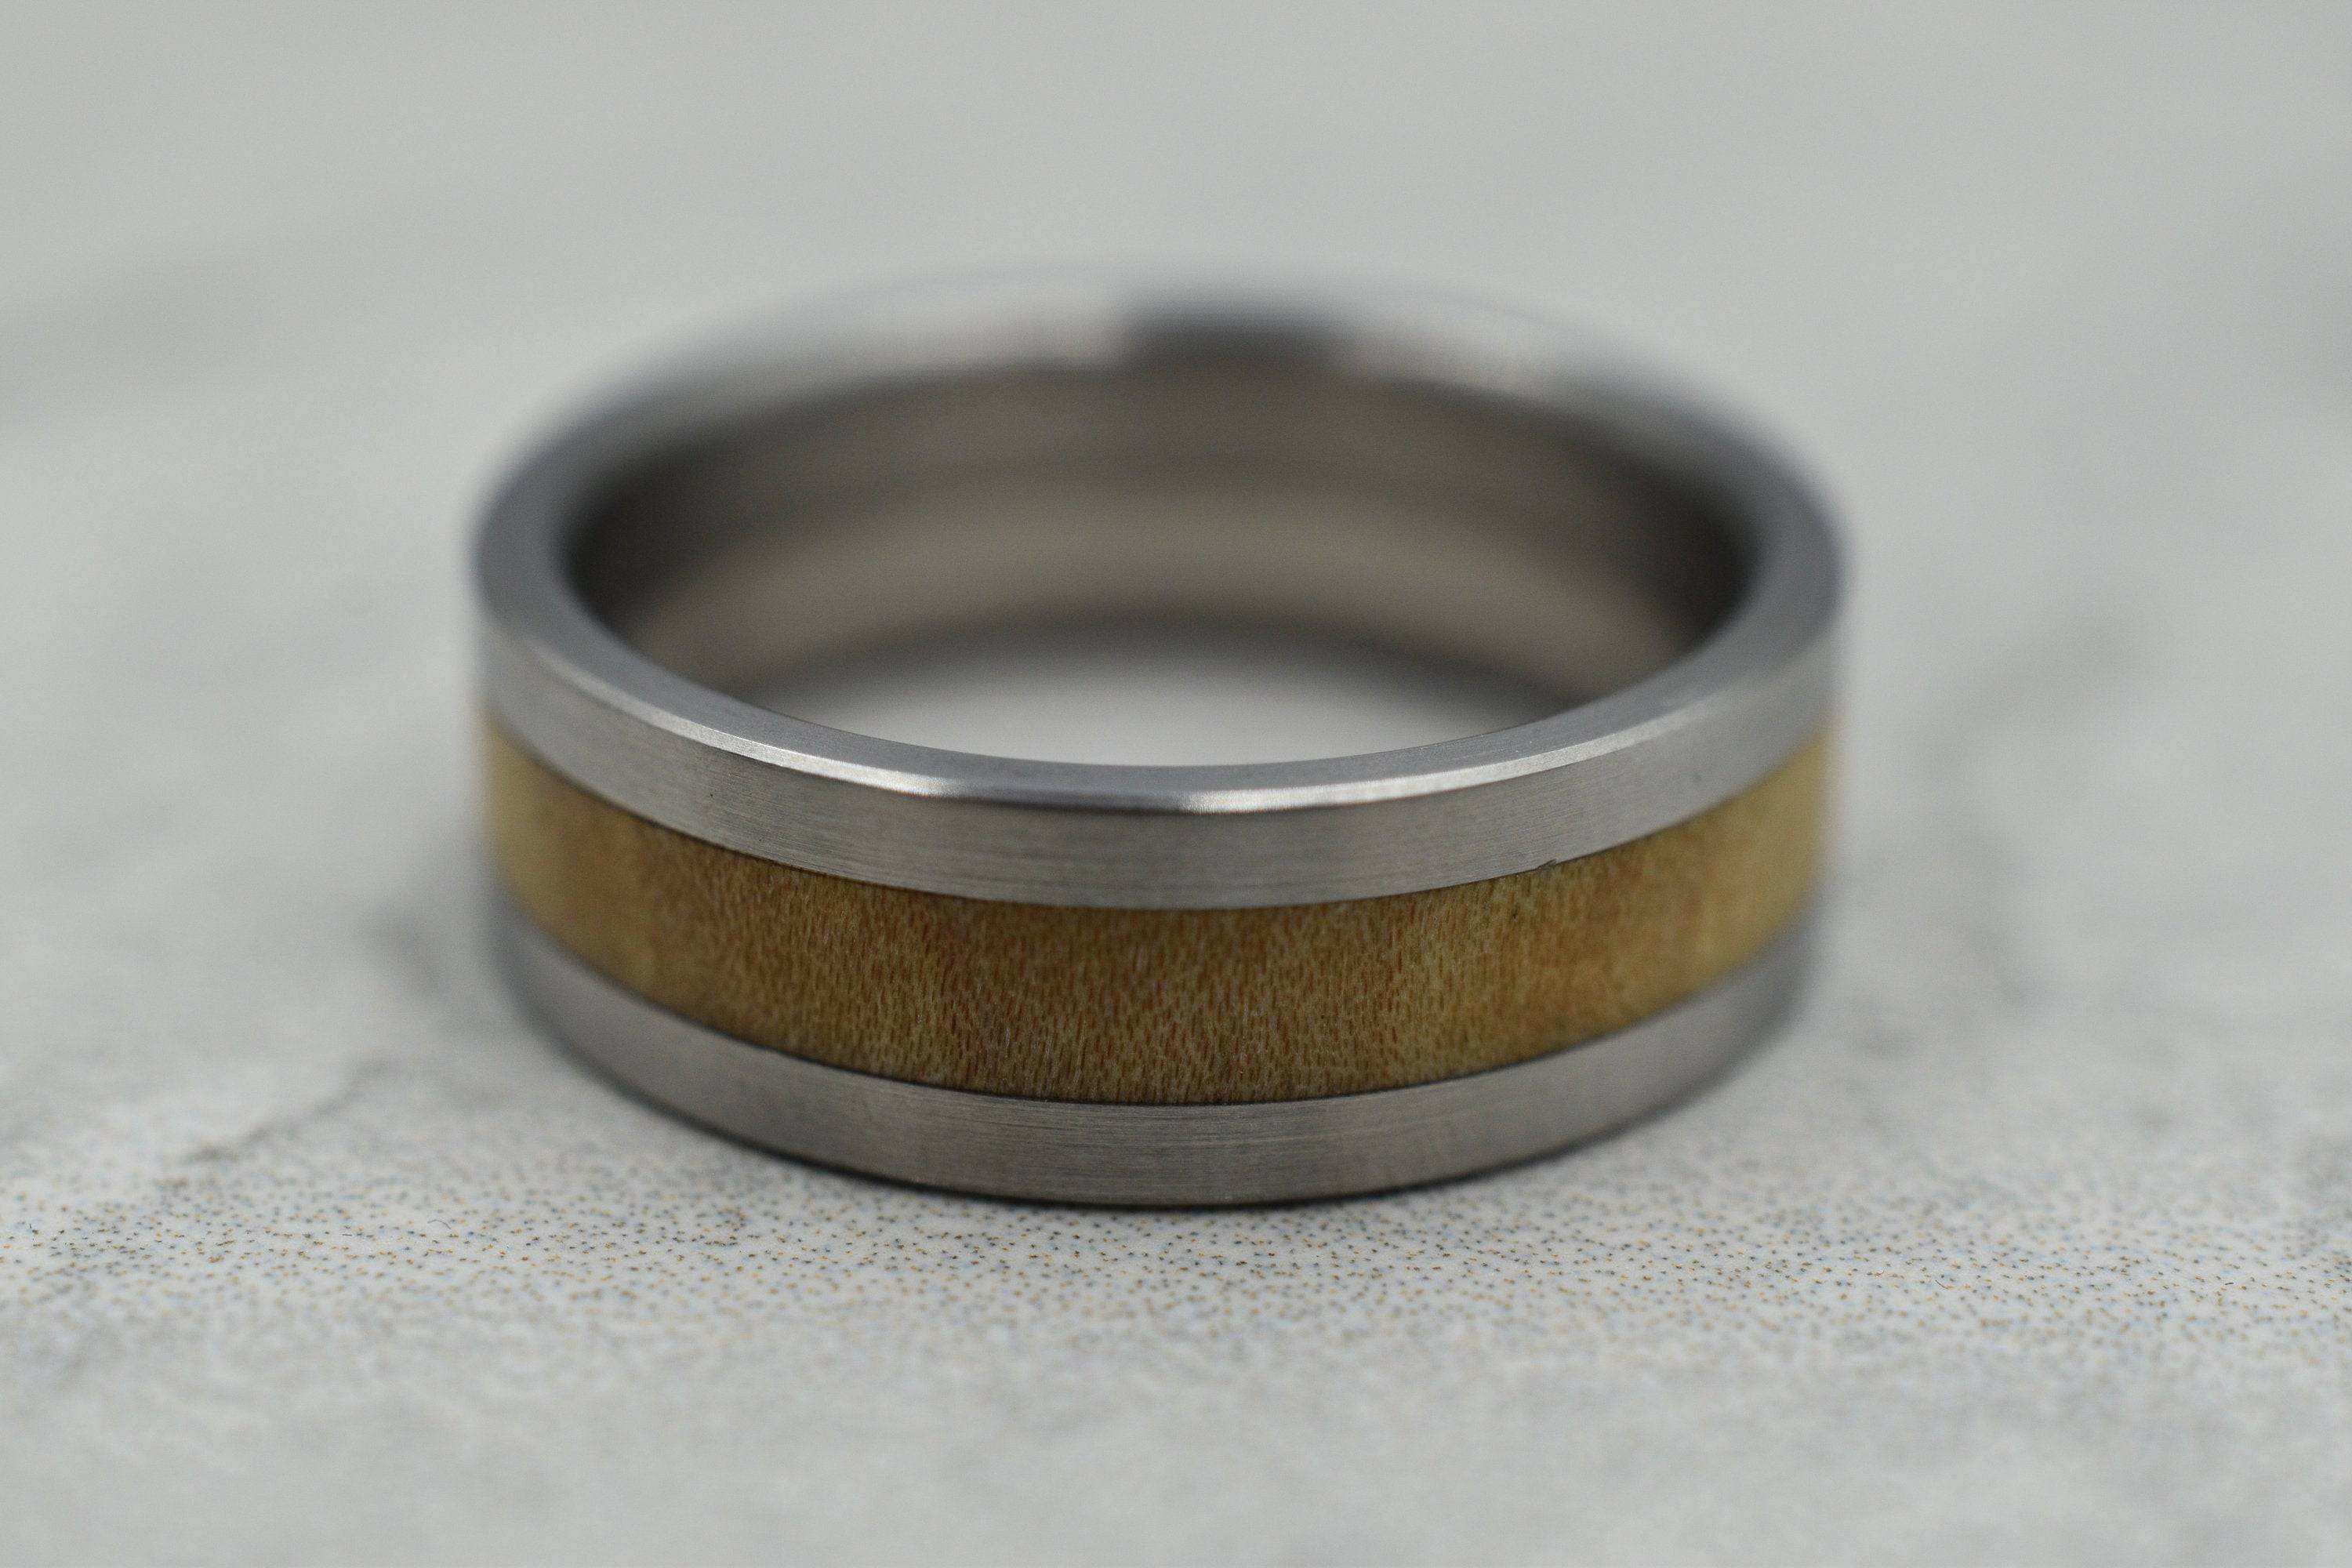 Canadian Maple Wood and Stainless Steel Ring - Other Metals & Inserts  Available - Wedding Band, Wedding Ring, Inlay, Thumb Ring, Men, Man | Loni  Design Group $281.75 | 10k Gold, 14k